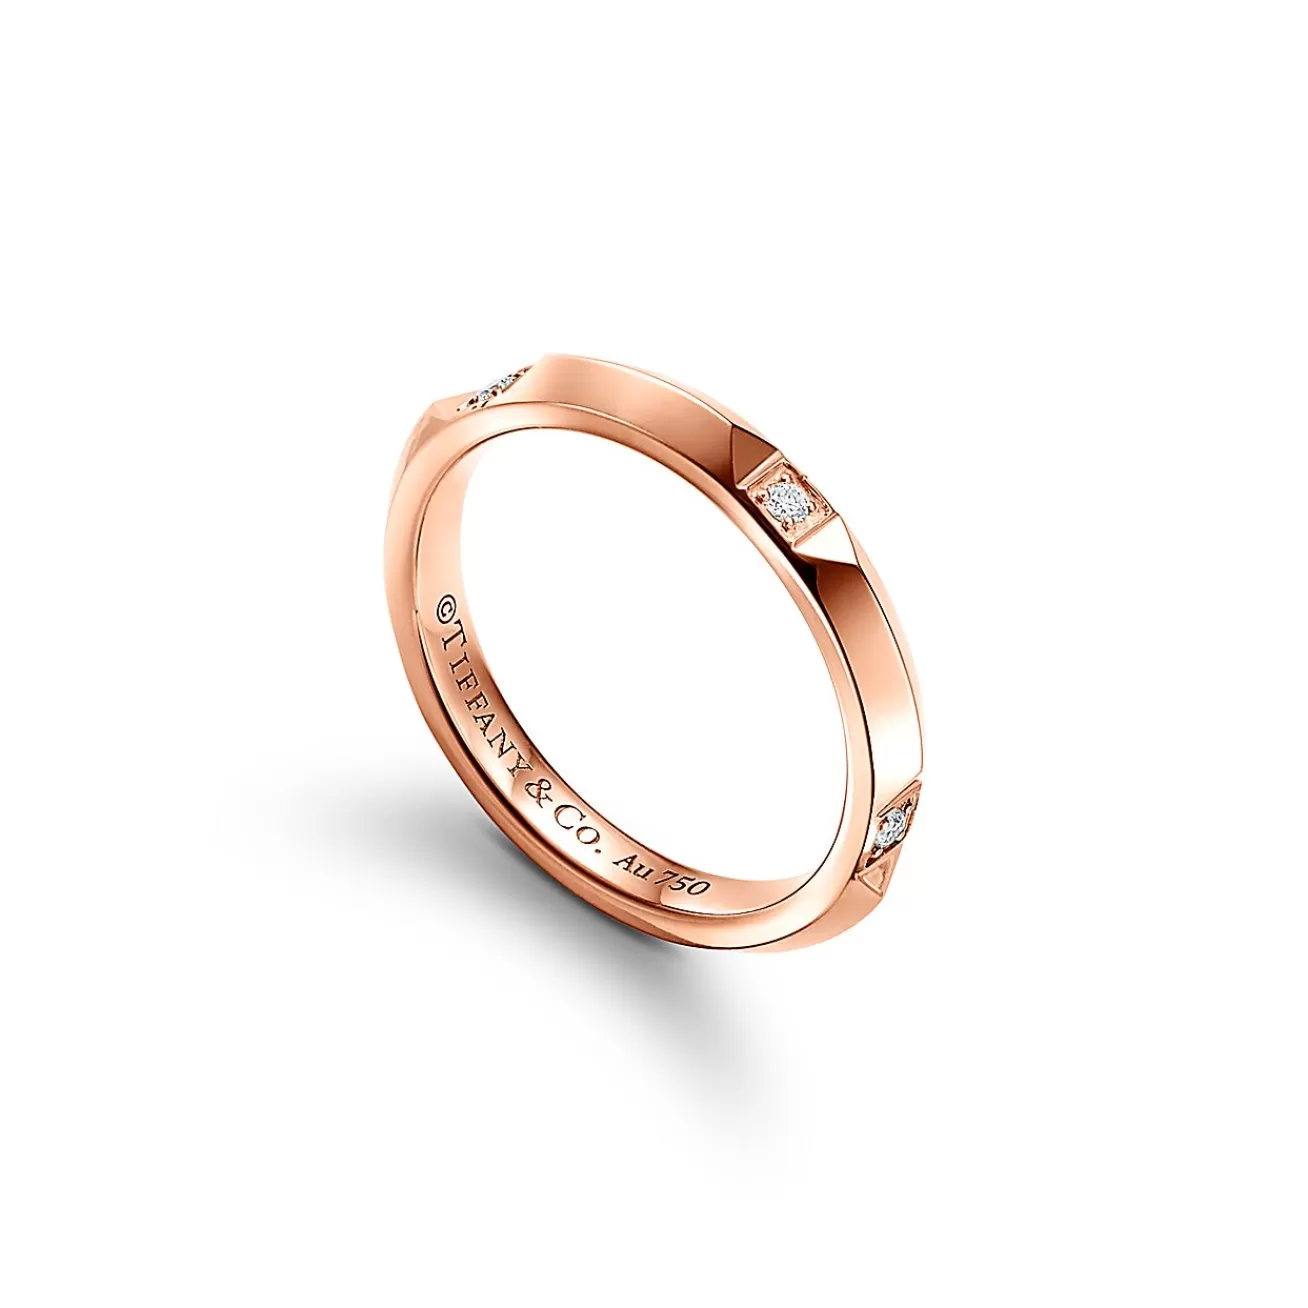 Tiffany & Co. Tiffany True® band ring in 18k rose gold with diamonds, 2.5 mm wide. | ^Women Rings | Men's Jewelry